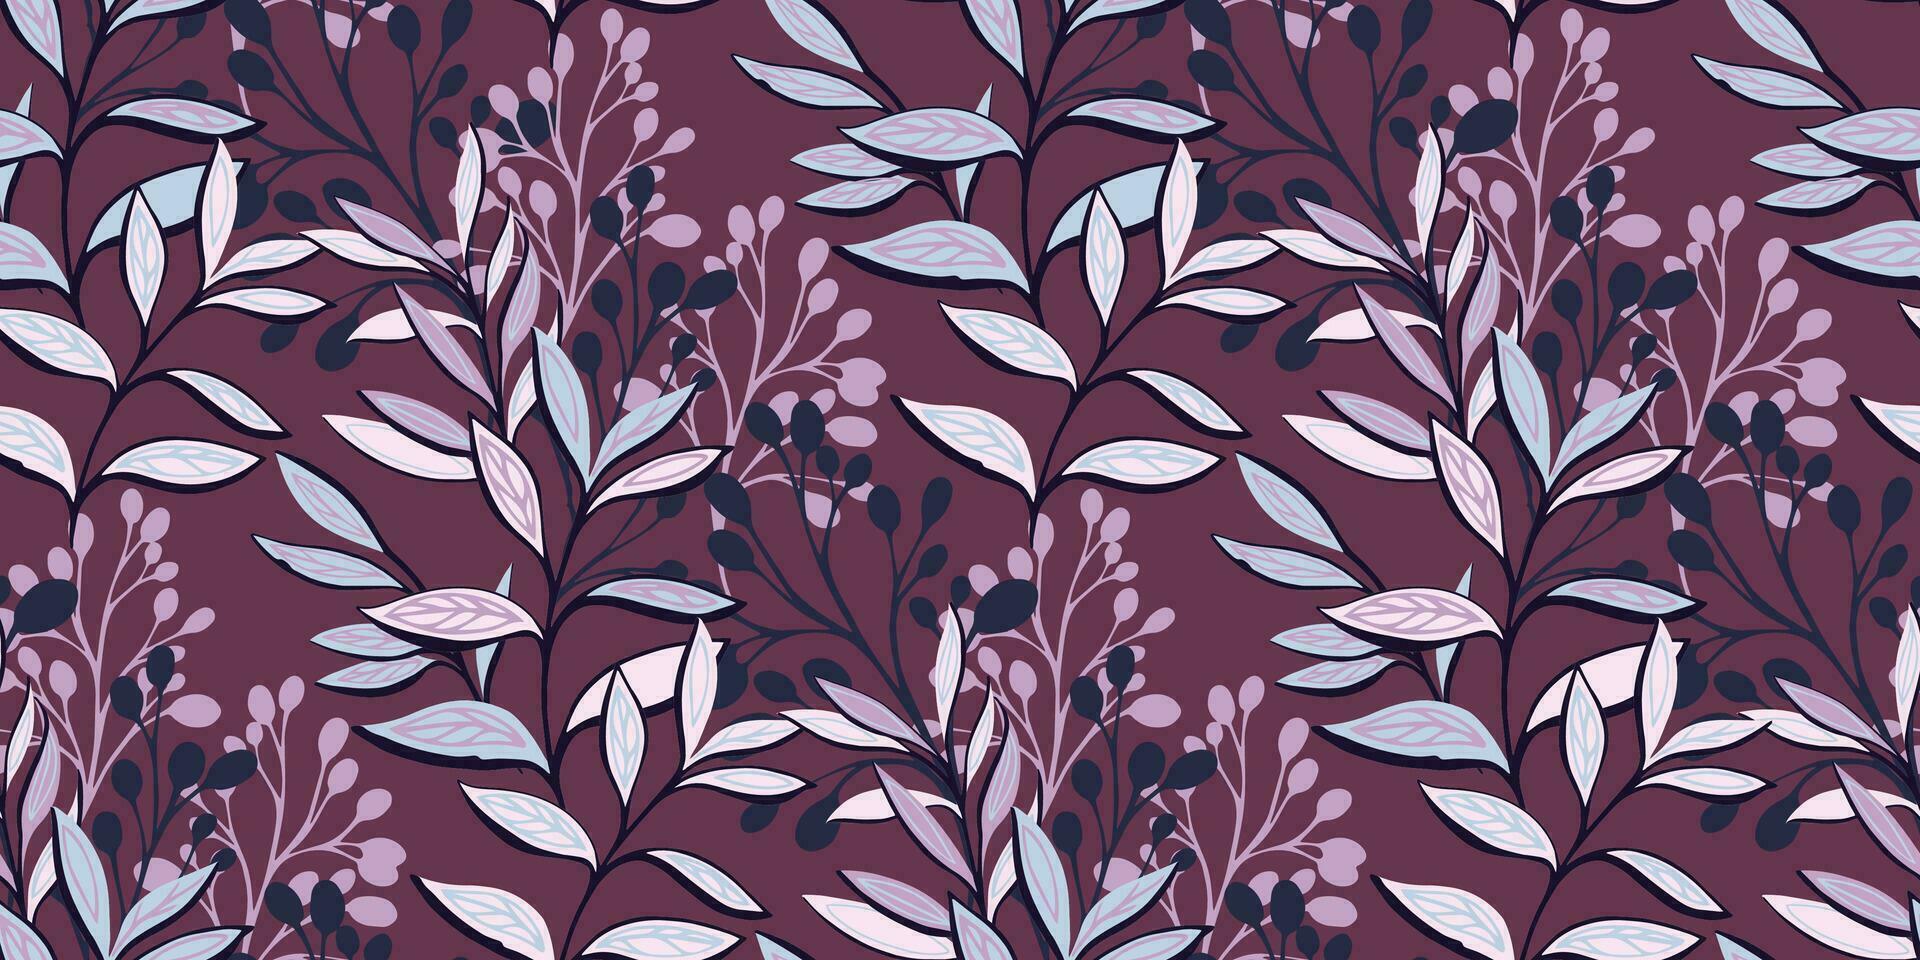 Modern, ornate, leaves branches seamless pattern. Vector hand drawn. Creative leaf stem on a burgundy back print. Design for fashion, fabric, wallpaper.